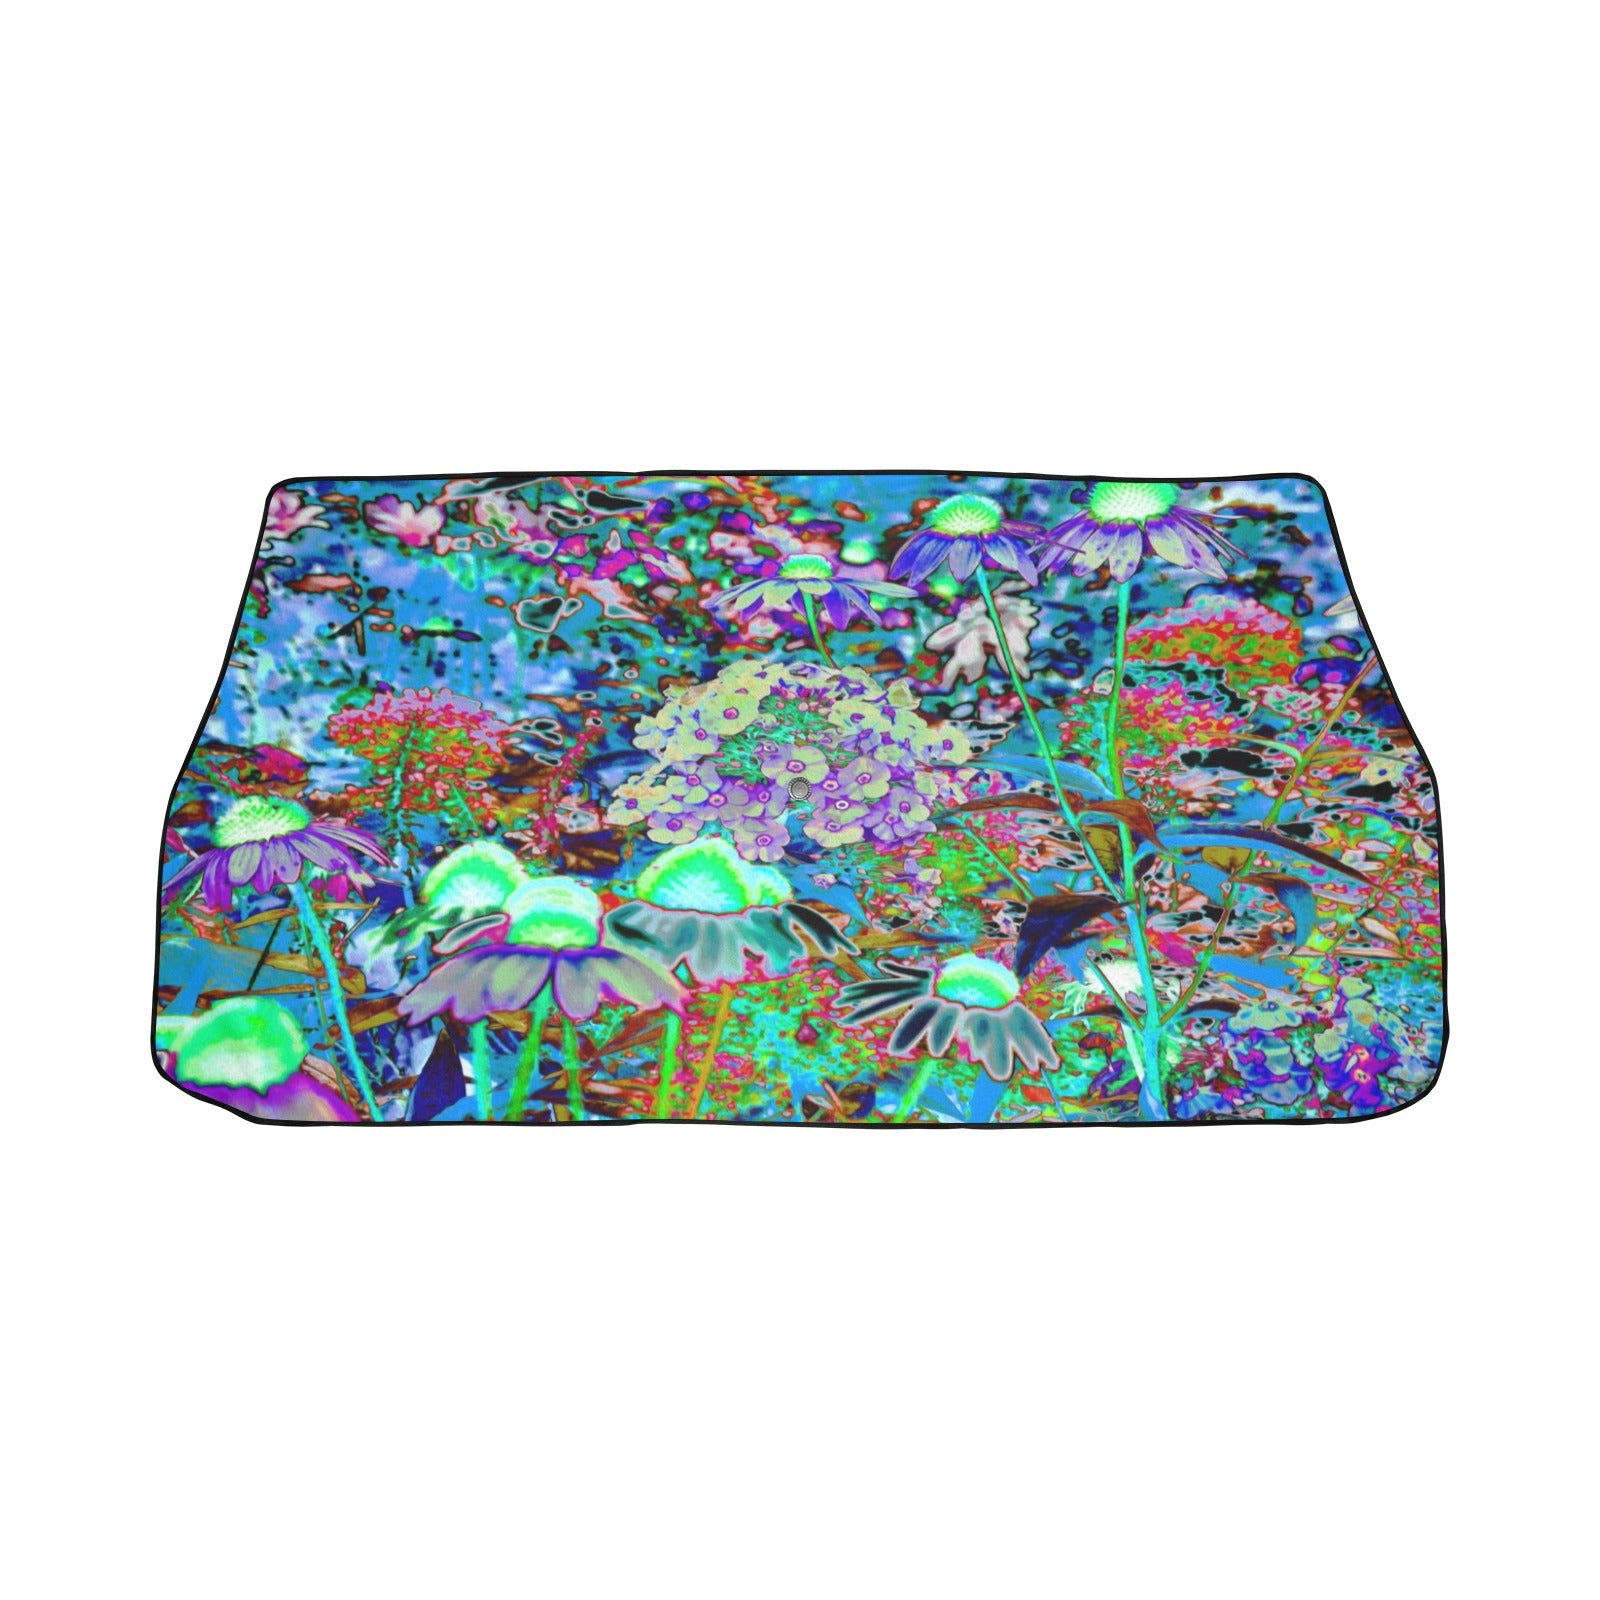 Car Umbrella Sunshades, Psychedelic Purple and Lime Green Garden Flowers